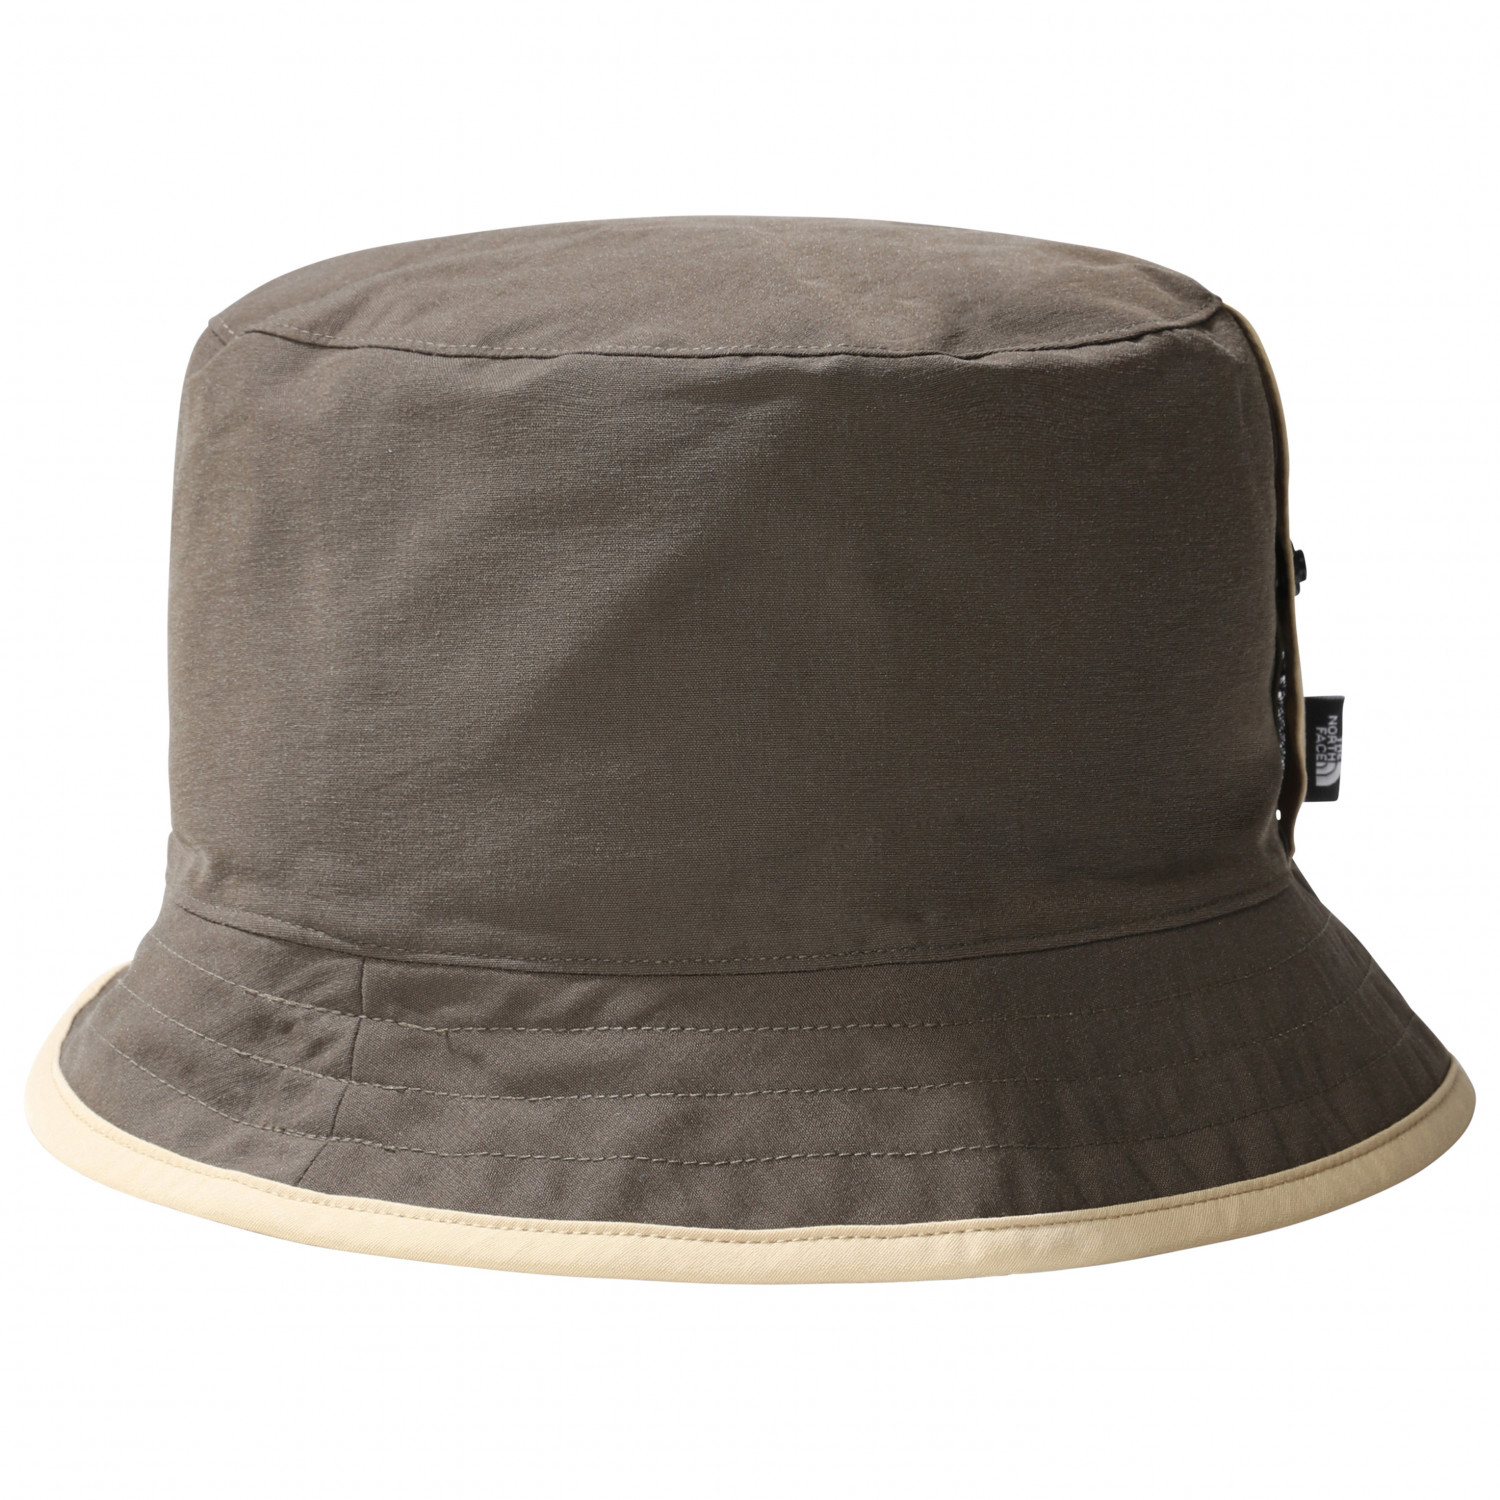 цена Кепка The North Face Class V Reversible Bucket Hat, цвет New Taupe Green/Khaki Stone